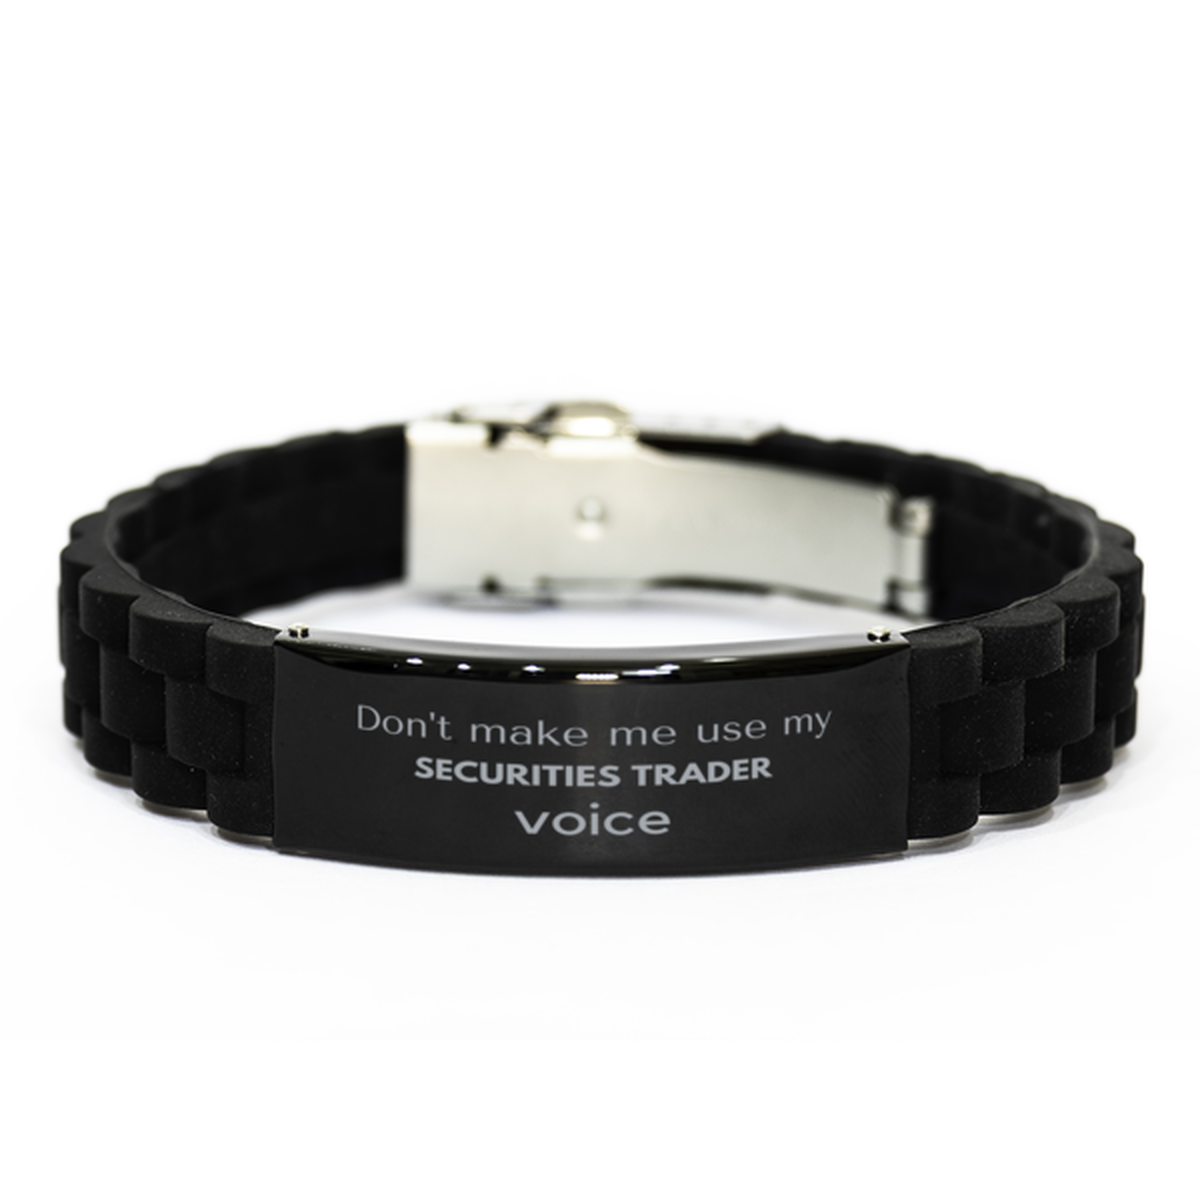 Don't make me use my Securities Trader voice, Sarcasm Securities Trader Gifts, Christmas Securities Trader Black Glidelock Clasp Bracelet Birthday Unique Gifts For Securities Trader Coworkers, Men, Women, Colleague, Friends